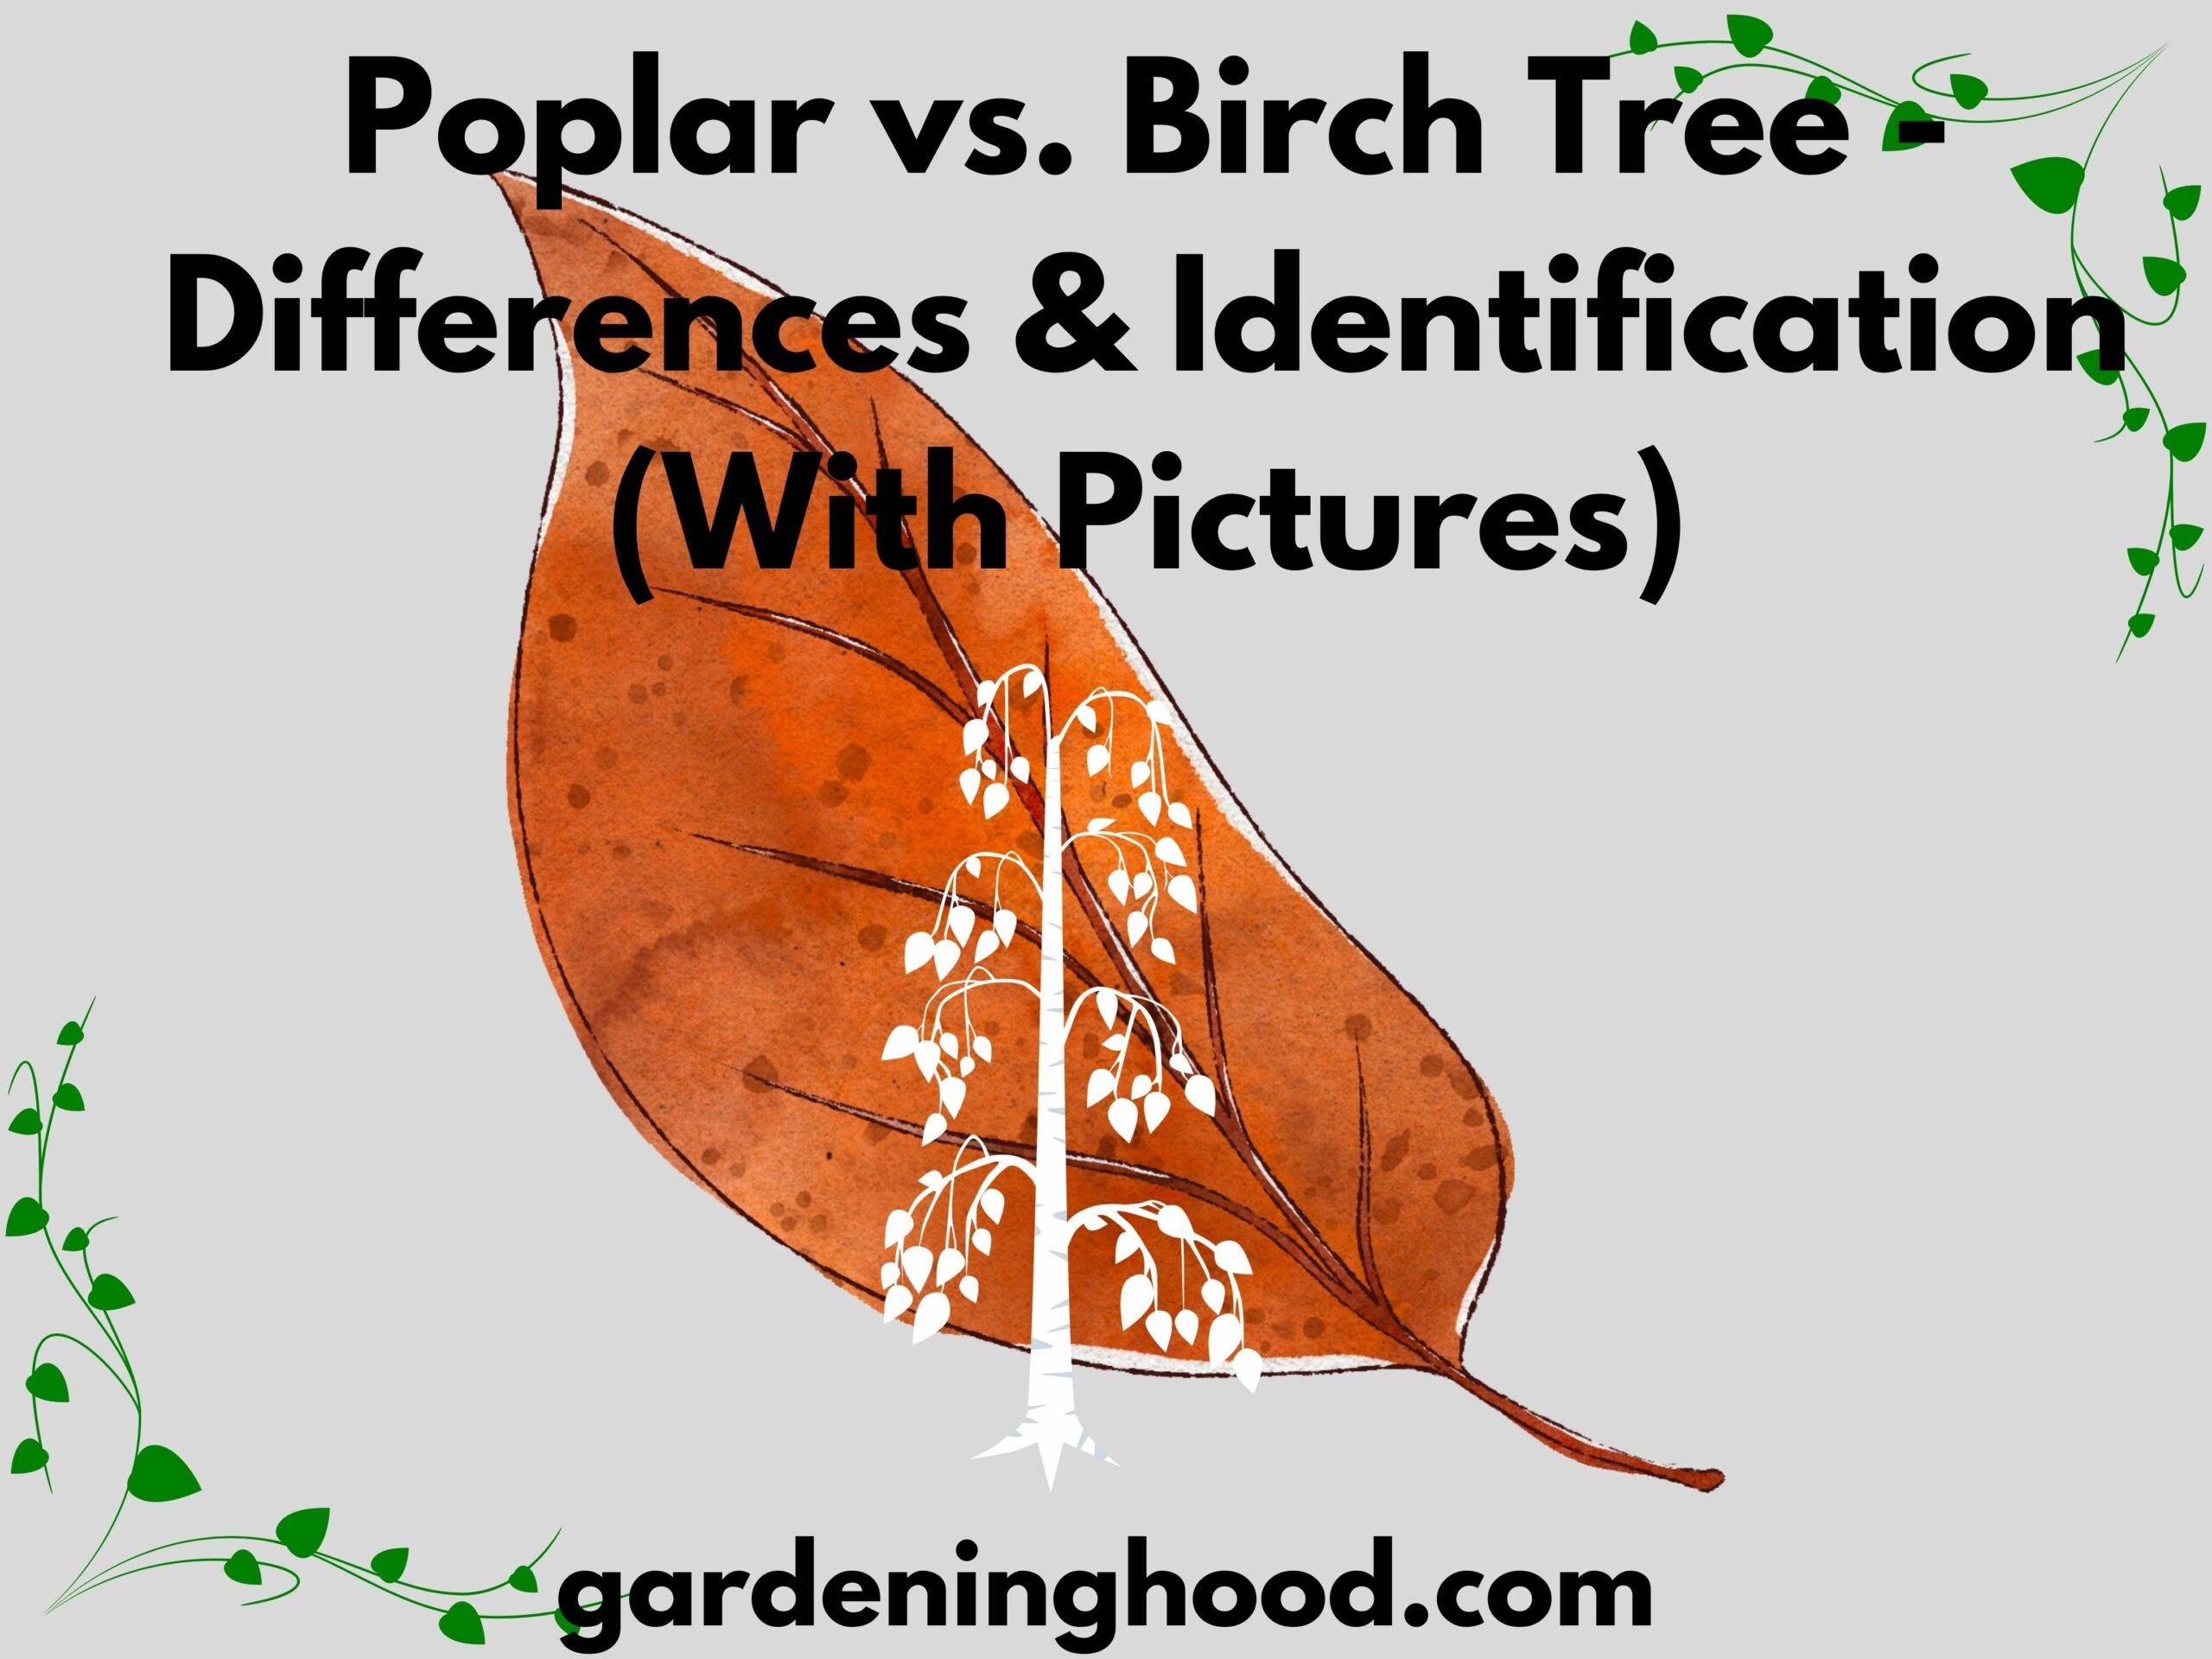 Poplar vs. Birch Tree - Differences & Identification (With Pictures)